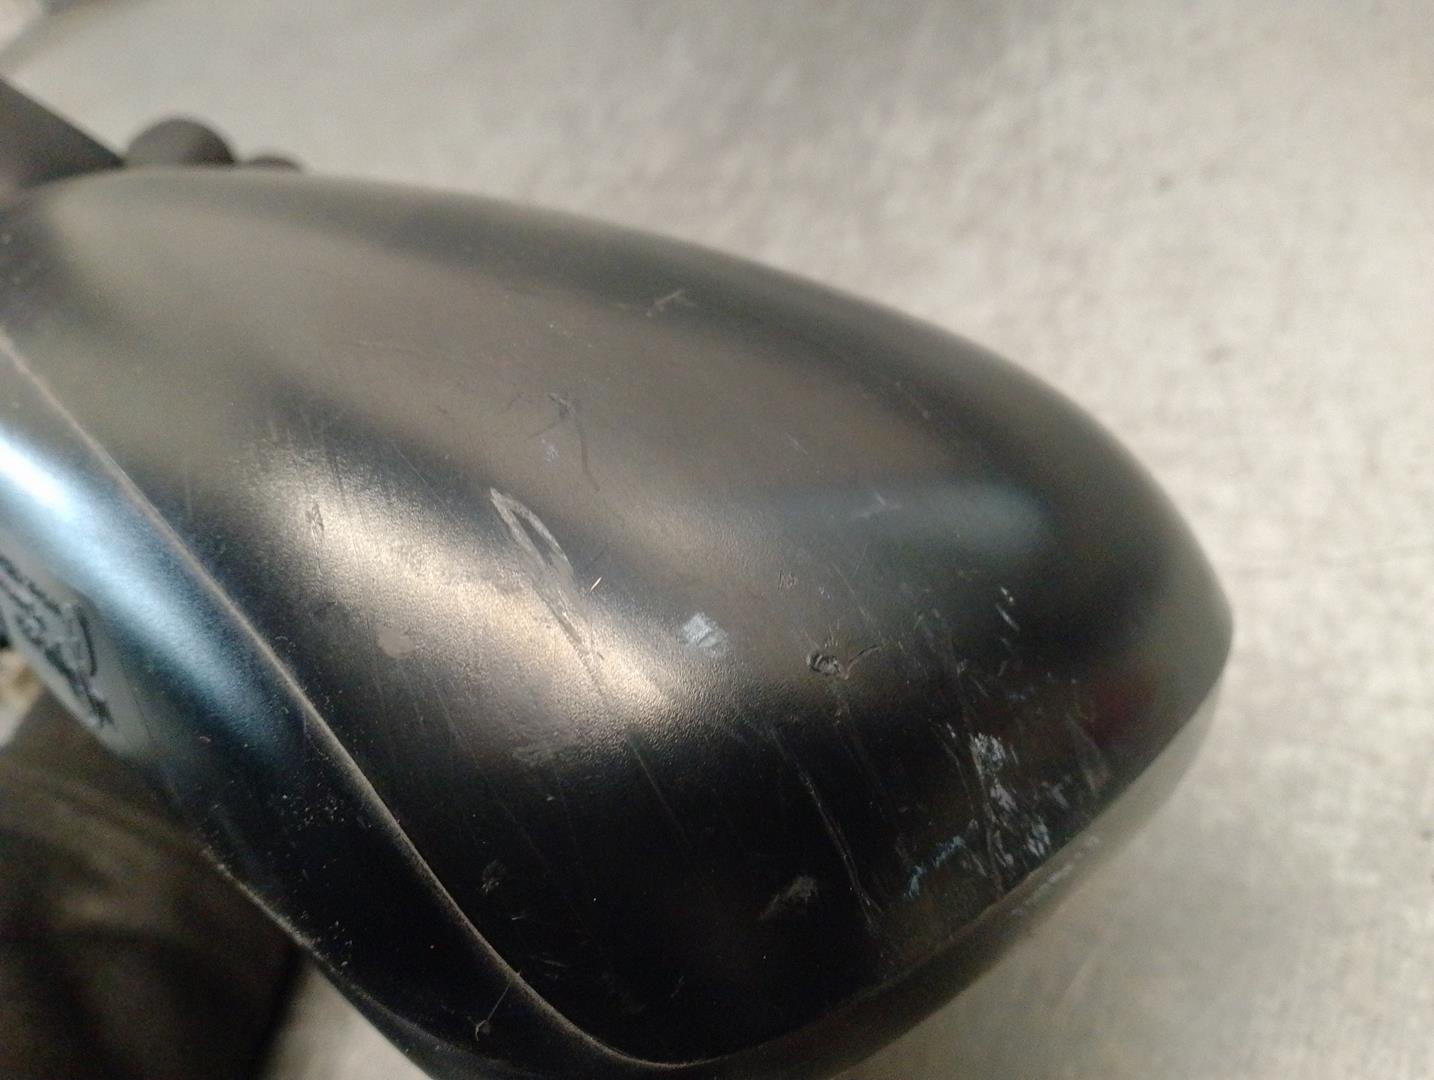 TOYOTA Avensis 1 generation (1997-2003) Left Side Wing Mirror SKH5636, 3PINES, 5PUERTAS 24214076